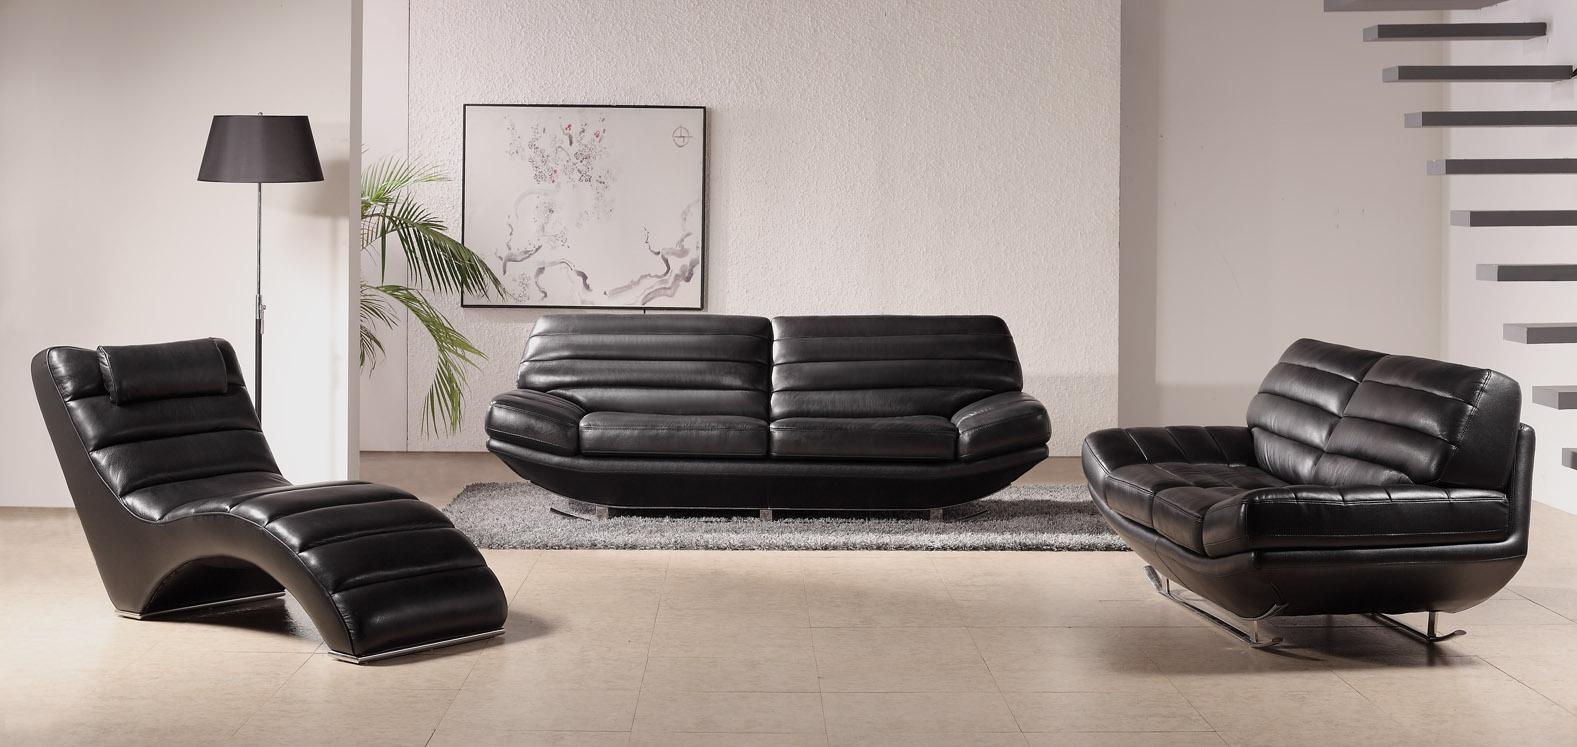 Modern Living With Wonderful Modern Living Room Design With Black Colored Contemporary Sofas Made From Leather And Cream Colored Floor Which Is Made From Marble Blocks Decoration Remarkable Beautiful Contemporary Sofas With Various Elegant Styles